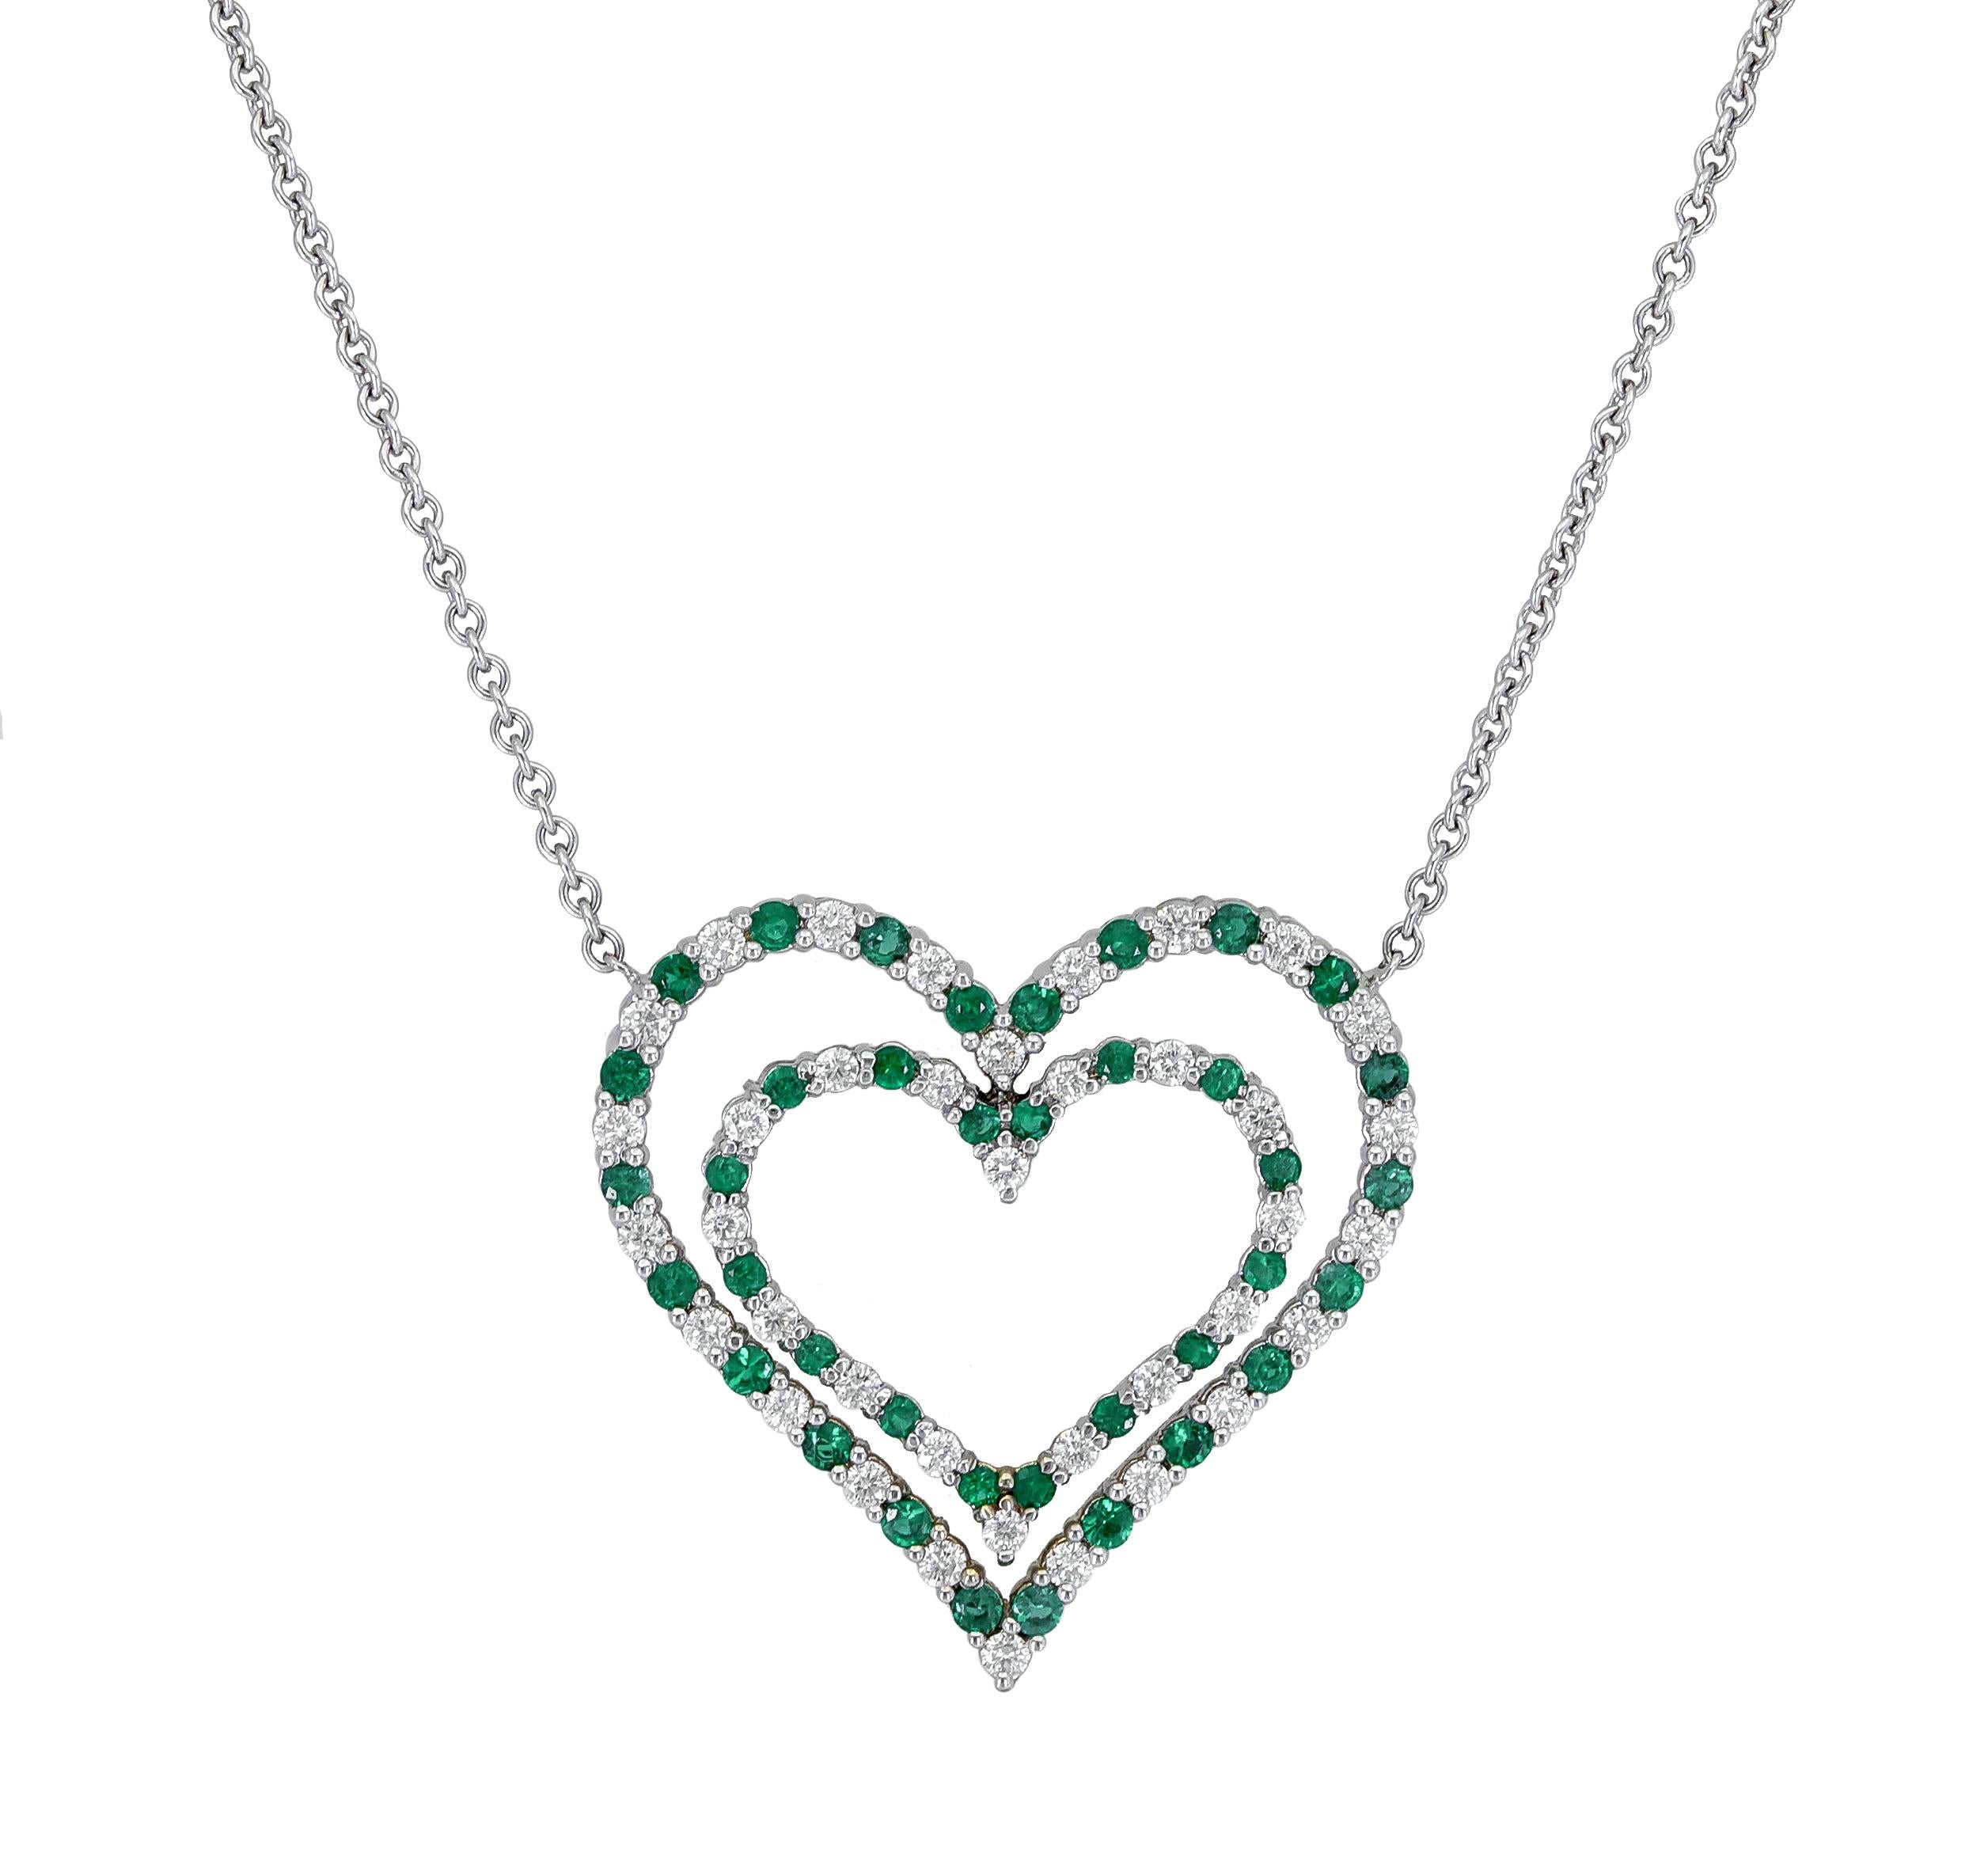 A beautiful open-work design pendant showcasing two rows of alternating green emeralds and diamonds, set in a chic heart shape motif. Made in 18k white gold.
Adjustable 14.5 and 18 inch chain.
Green emeralds and diamonds weigh 5 carats